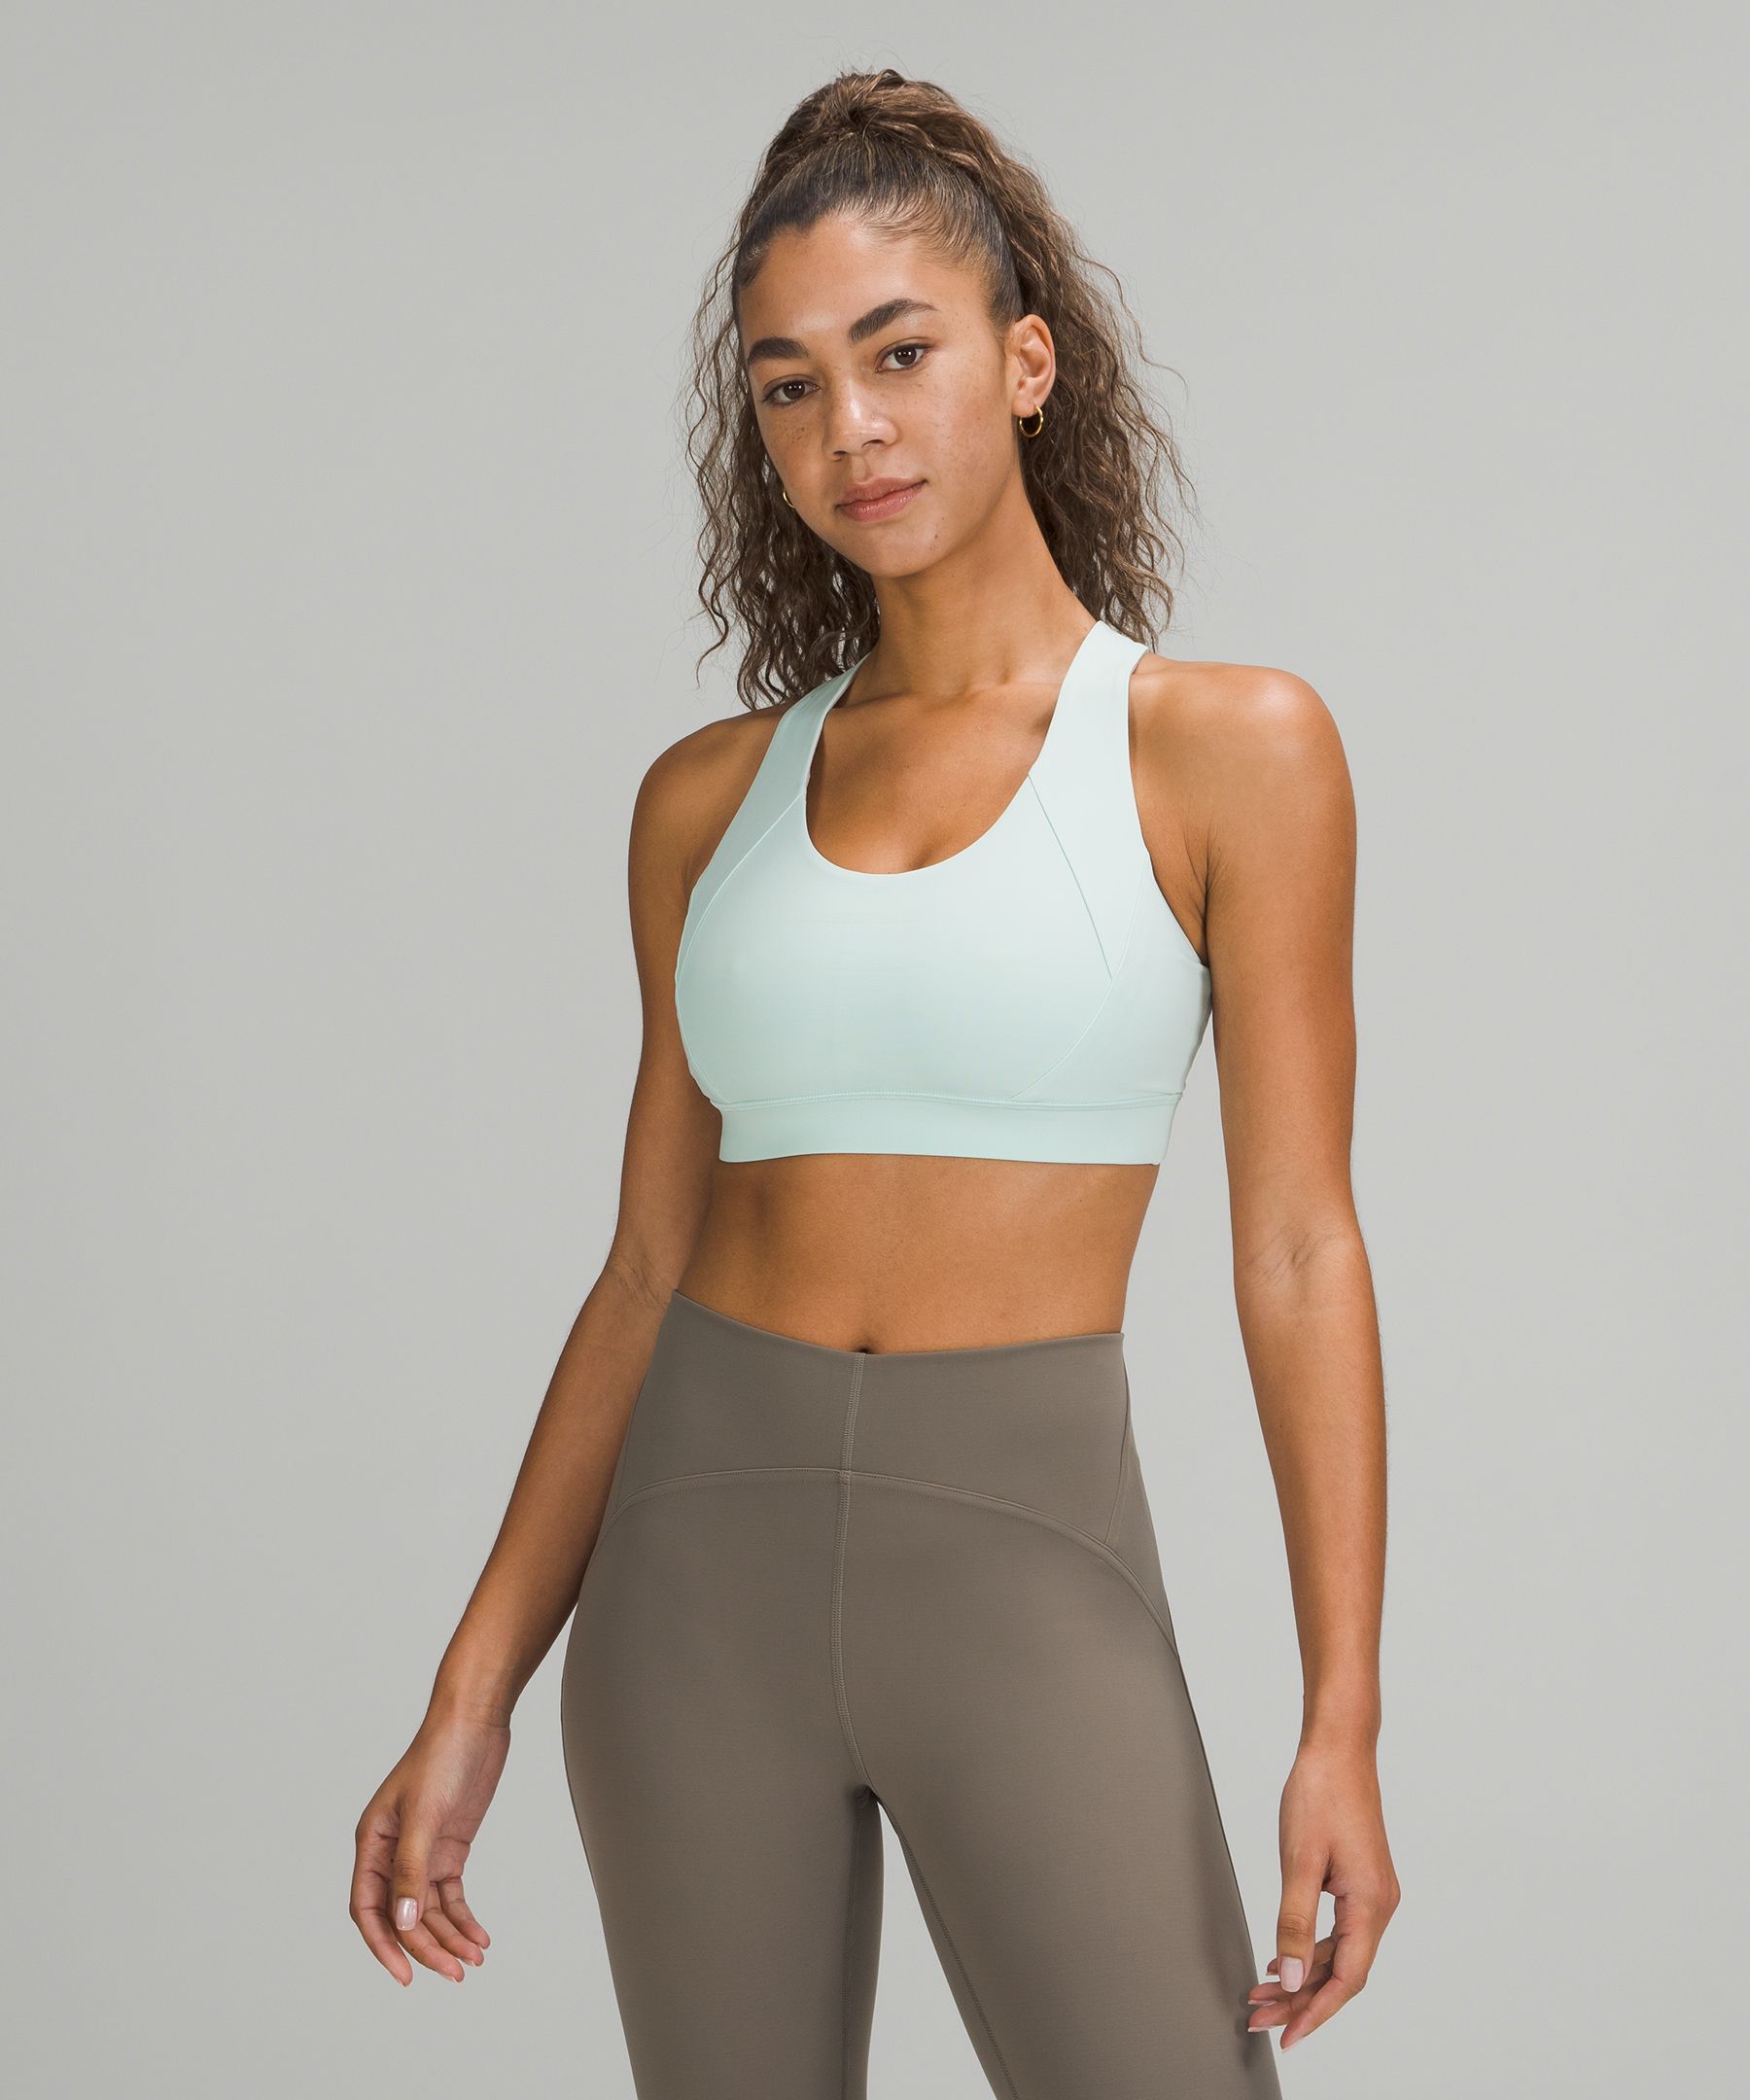 Lululemon Free To Be Elevated Bra Light Support, Dd/ddd(e) Cup In Delicate Mint